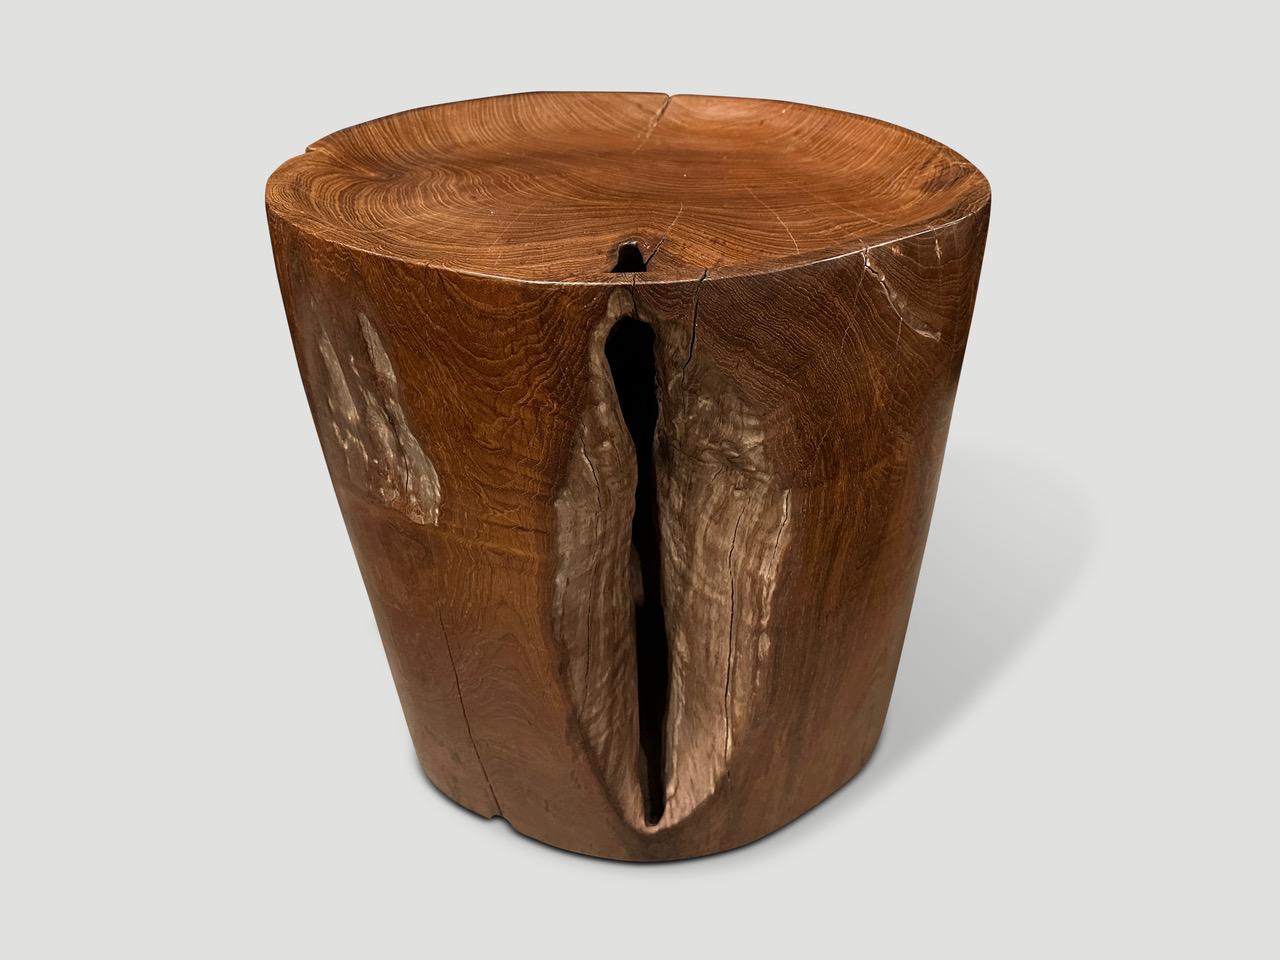 Natural organic formed reclaimed teak root side table. We hand carved the top section into a tray style and polished the aged teak with a natural oil revealing the beautiful wood grain. The inner sections are sanded and left unpolished in contrast.